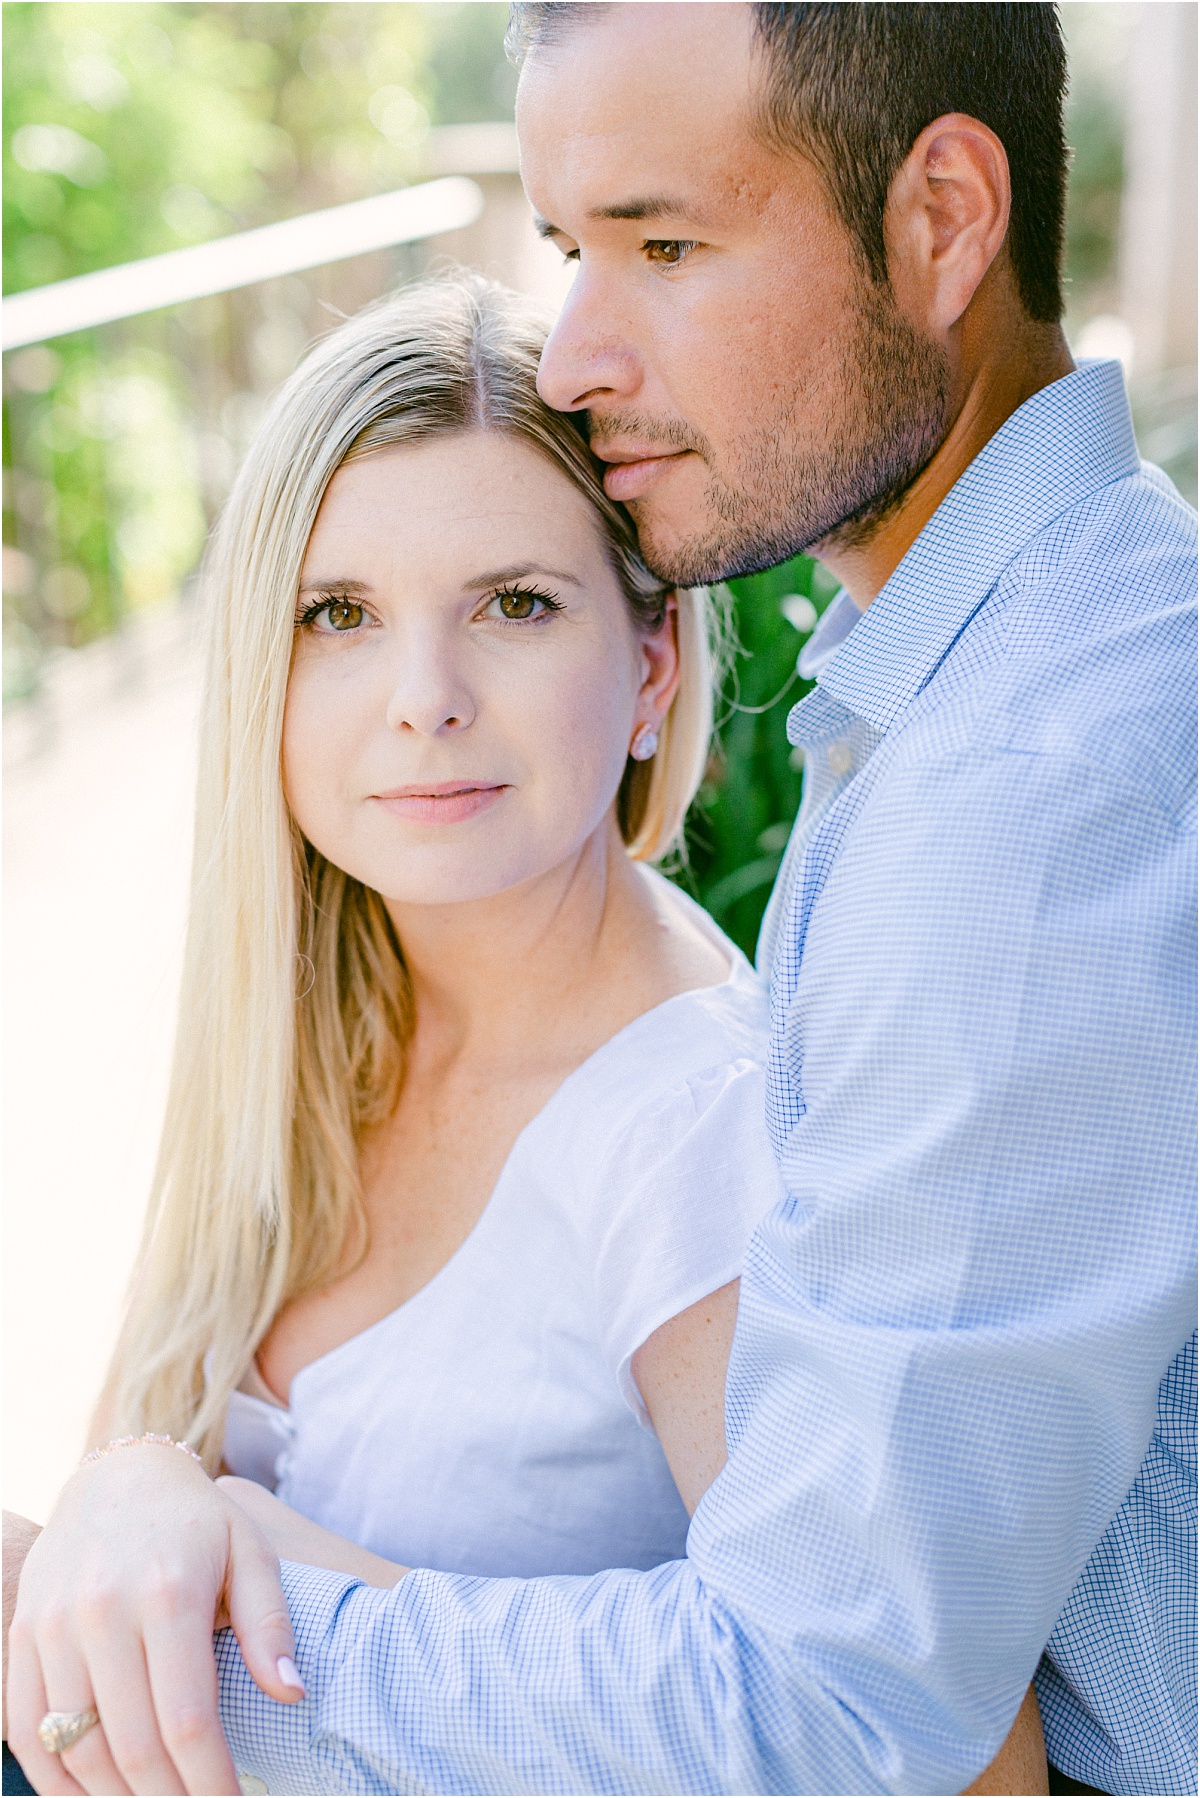 McNay Art Museum Engagement Session